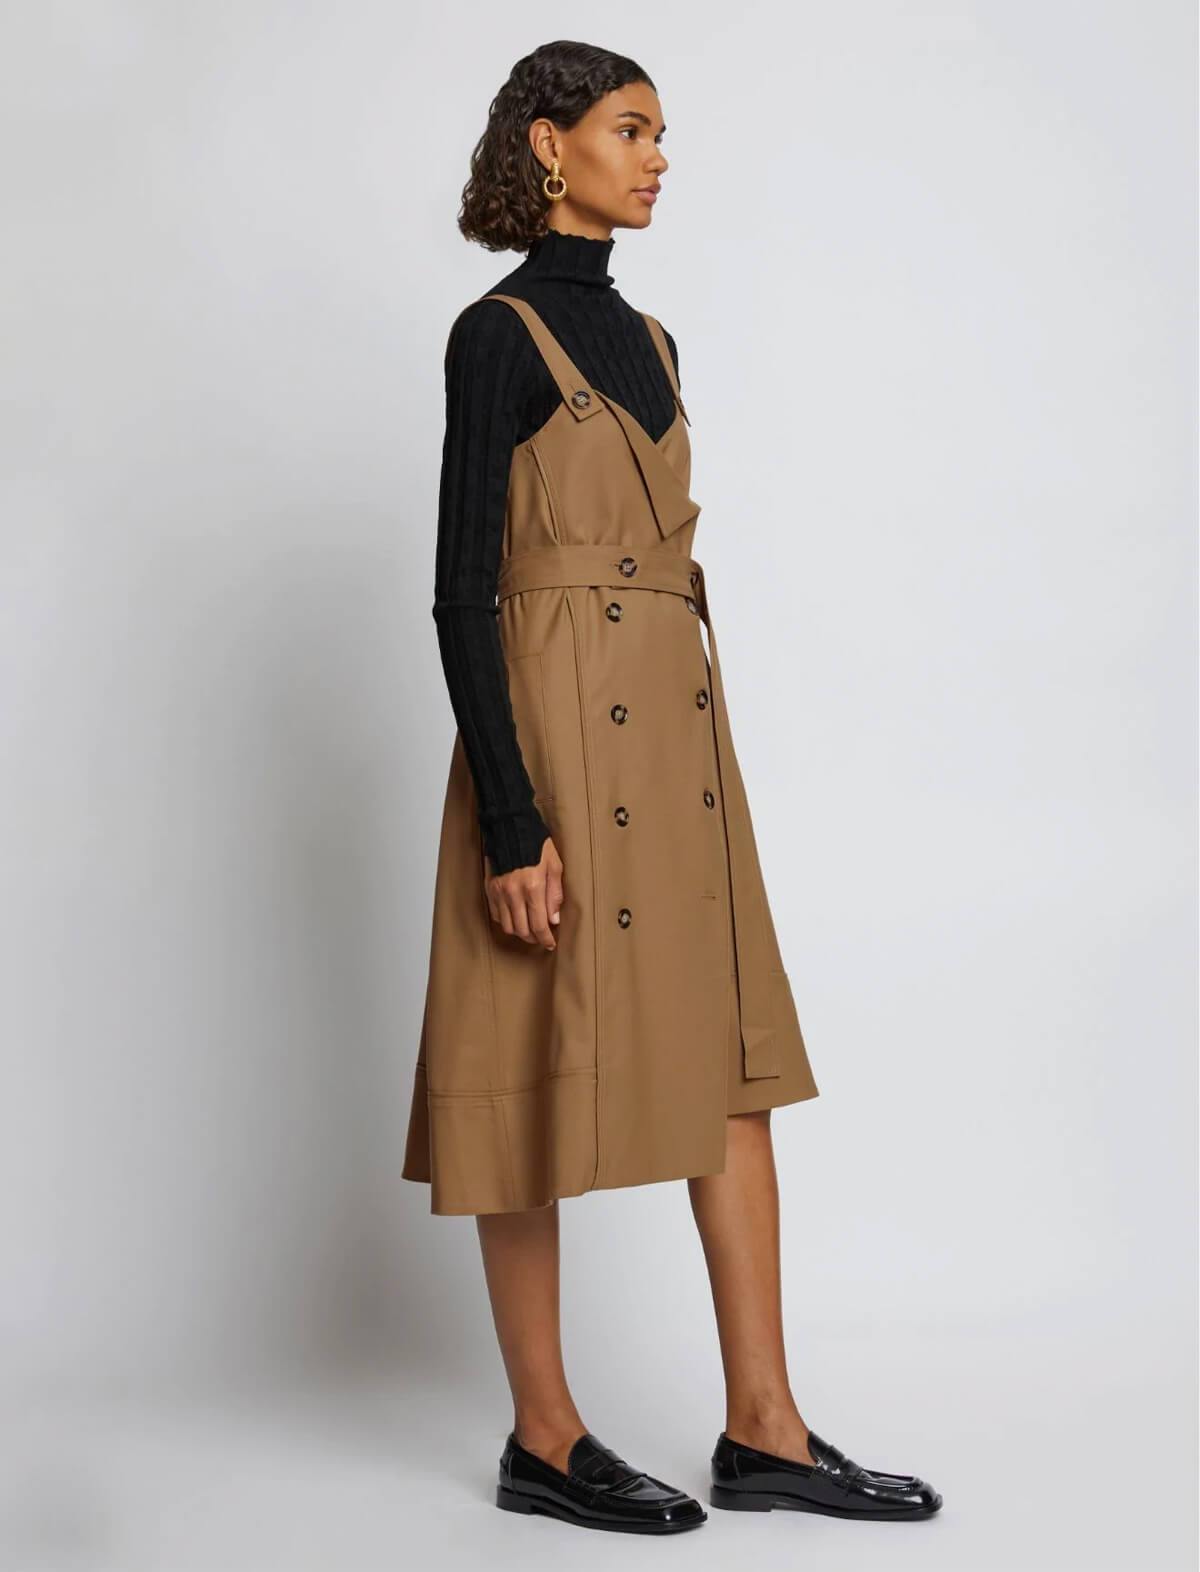 PROENZA SCHOULER WHITE LABEL Suiting Trench Dress in Cider | CLOSET Singapore